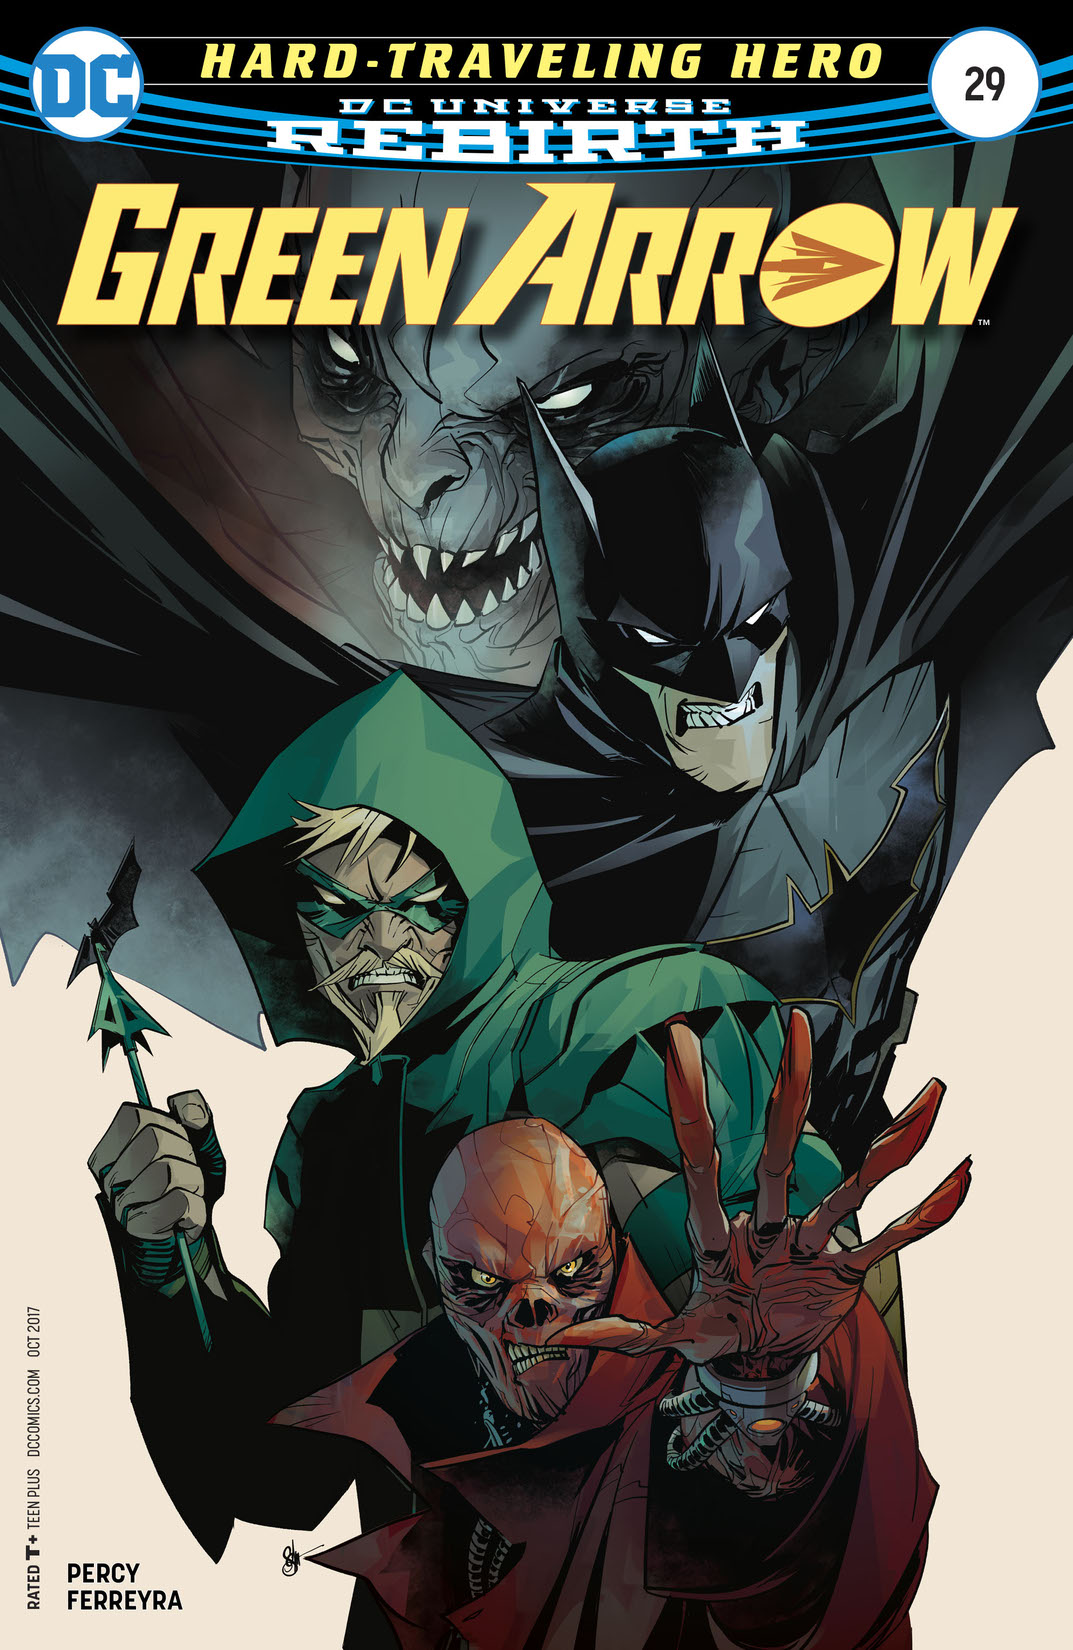 Green Arrow (2016-) #29 preview images